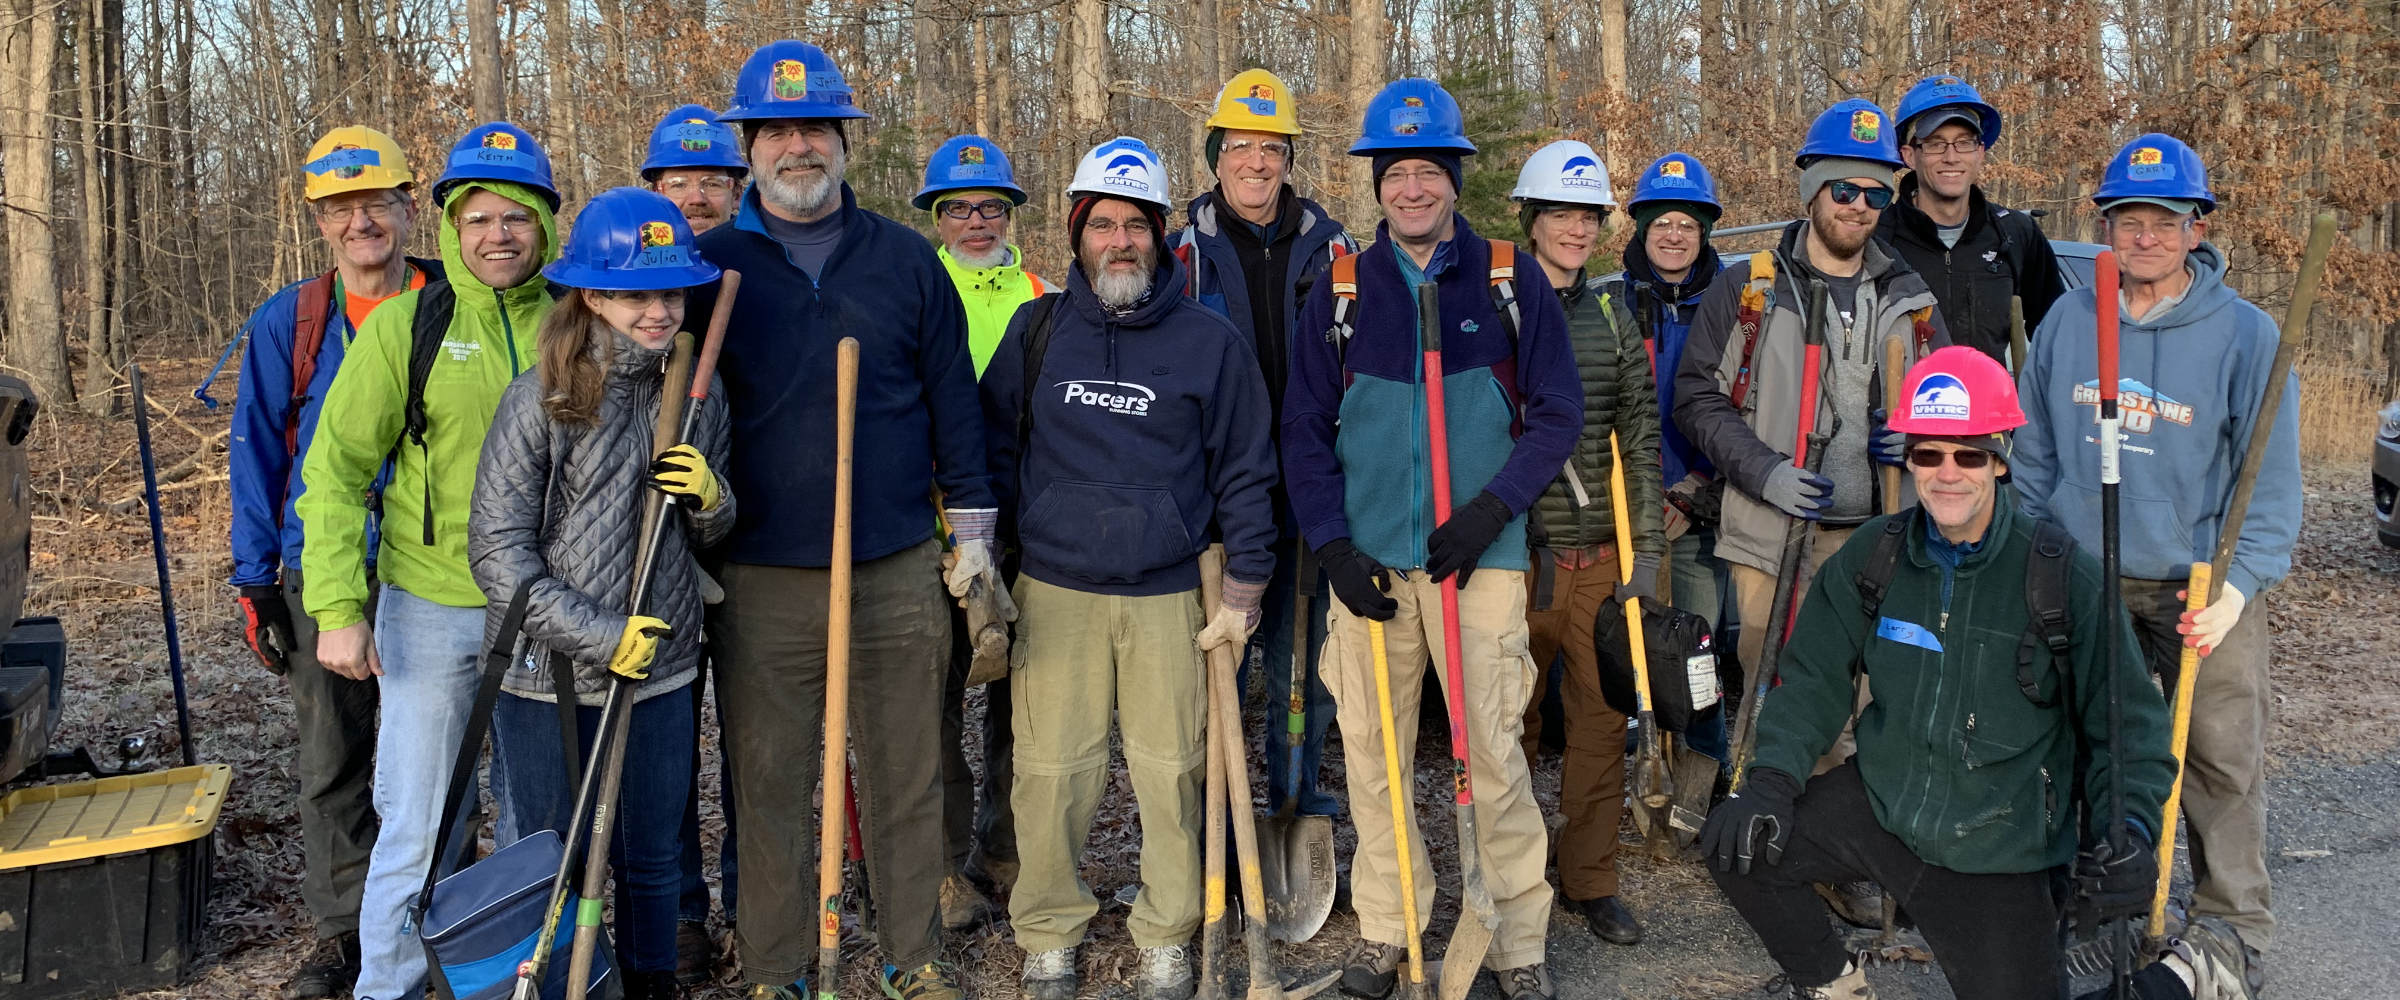 VHTRC trail workers before a January, 2019 outing on the Bull Run Occoquan Trail